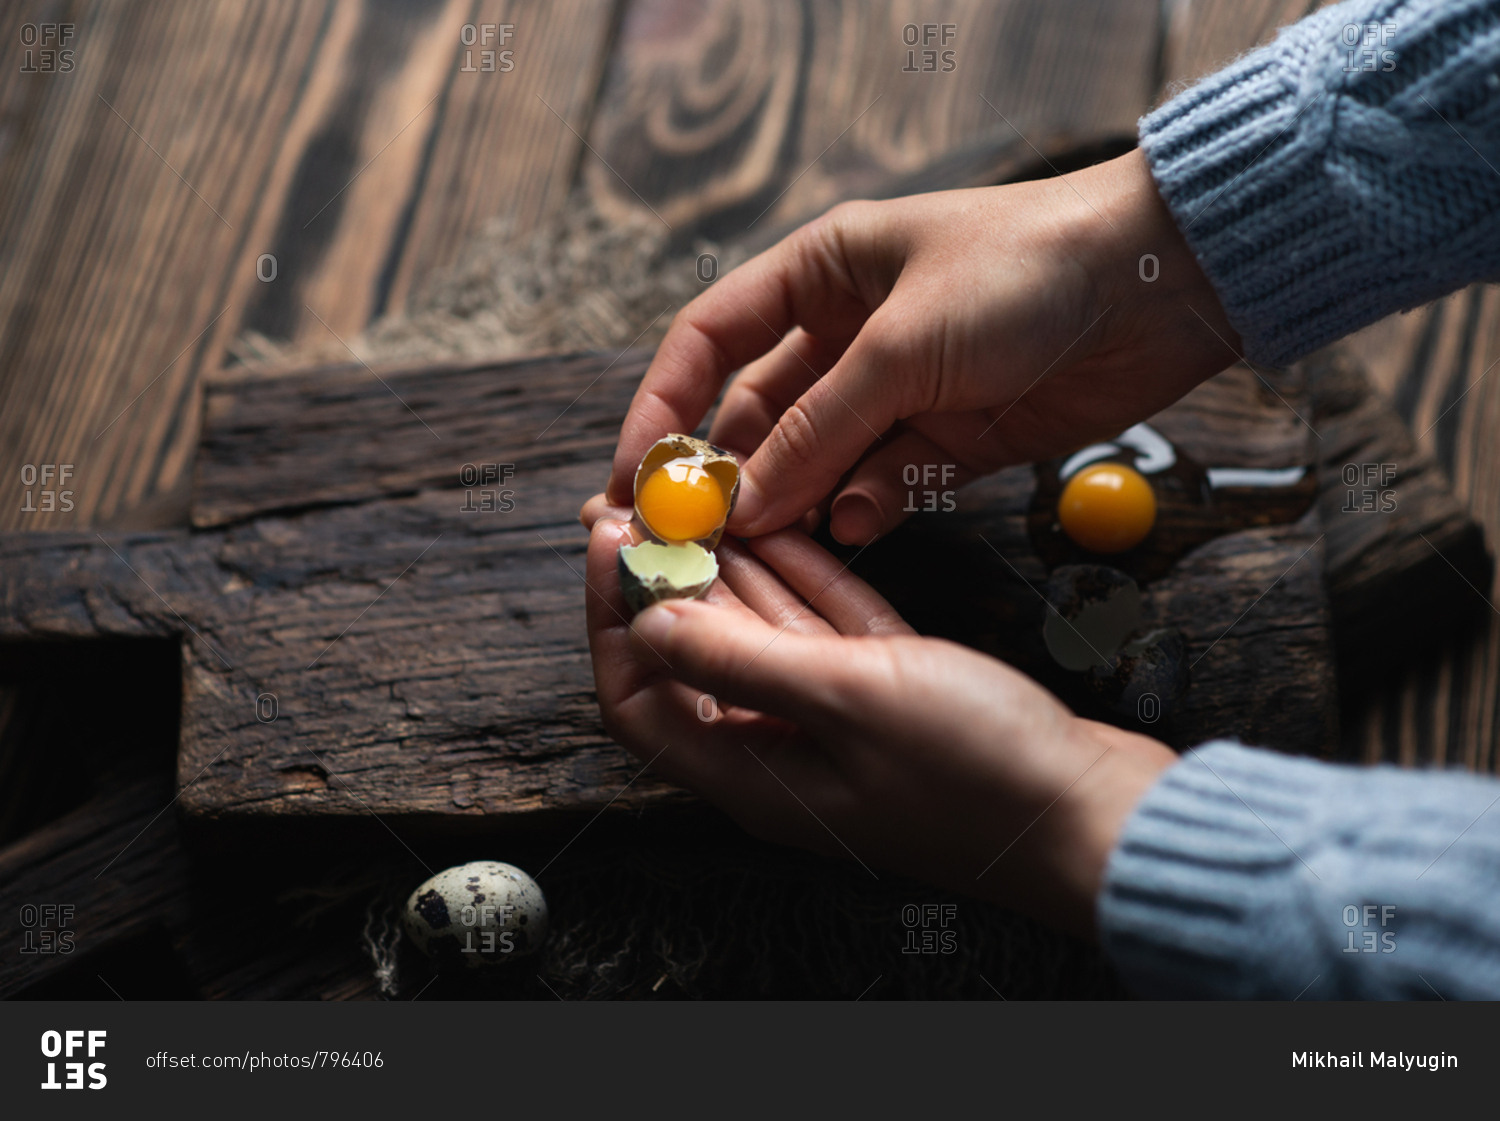 Unrecognizable woman holding broken quail egg with bright yolk in her hands over dark wooden background, view from above